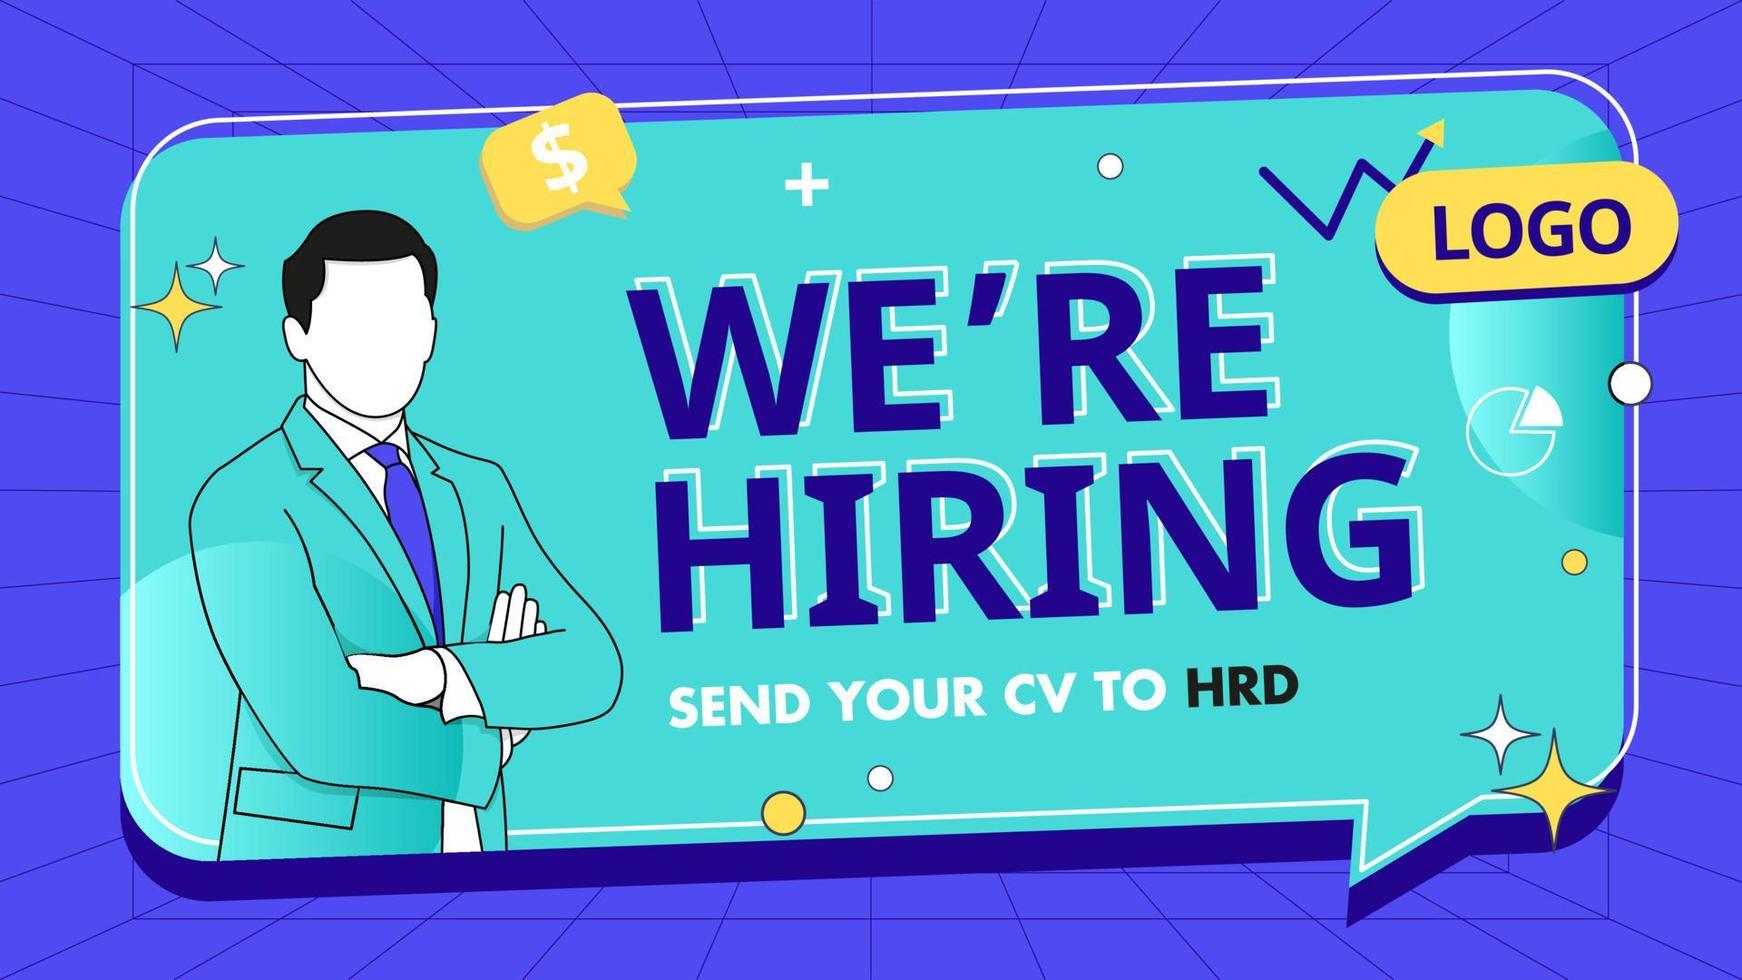 We are hiring banner design with flat business man illustration vector